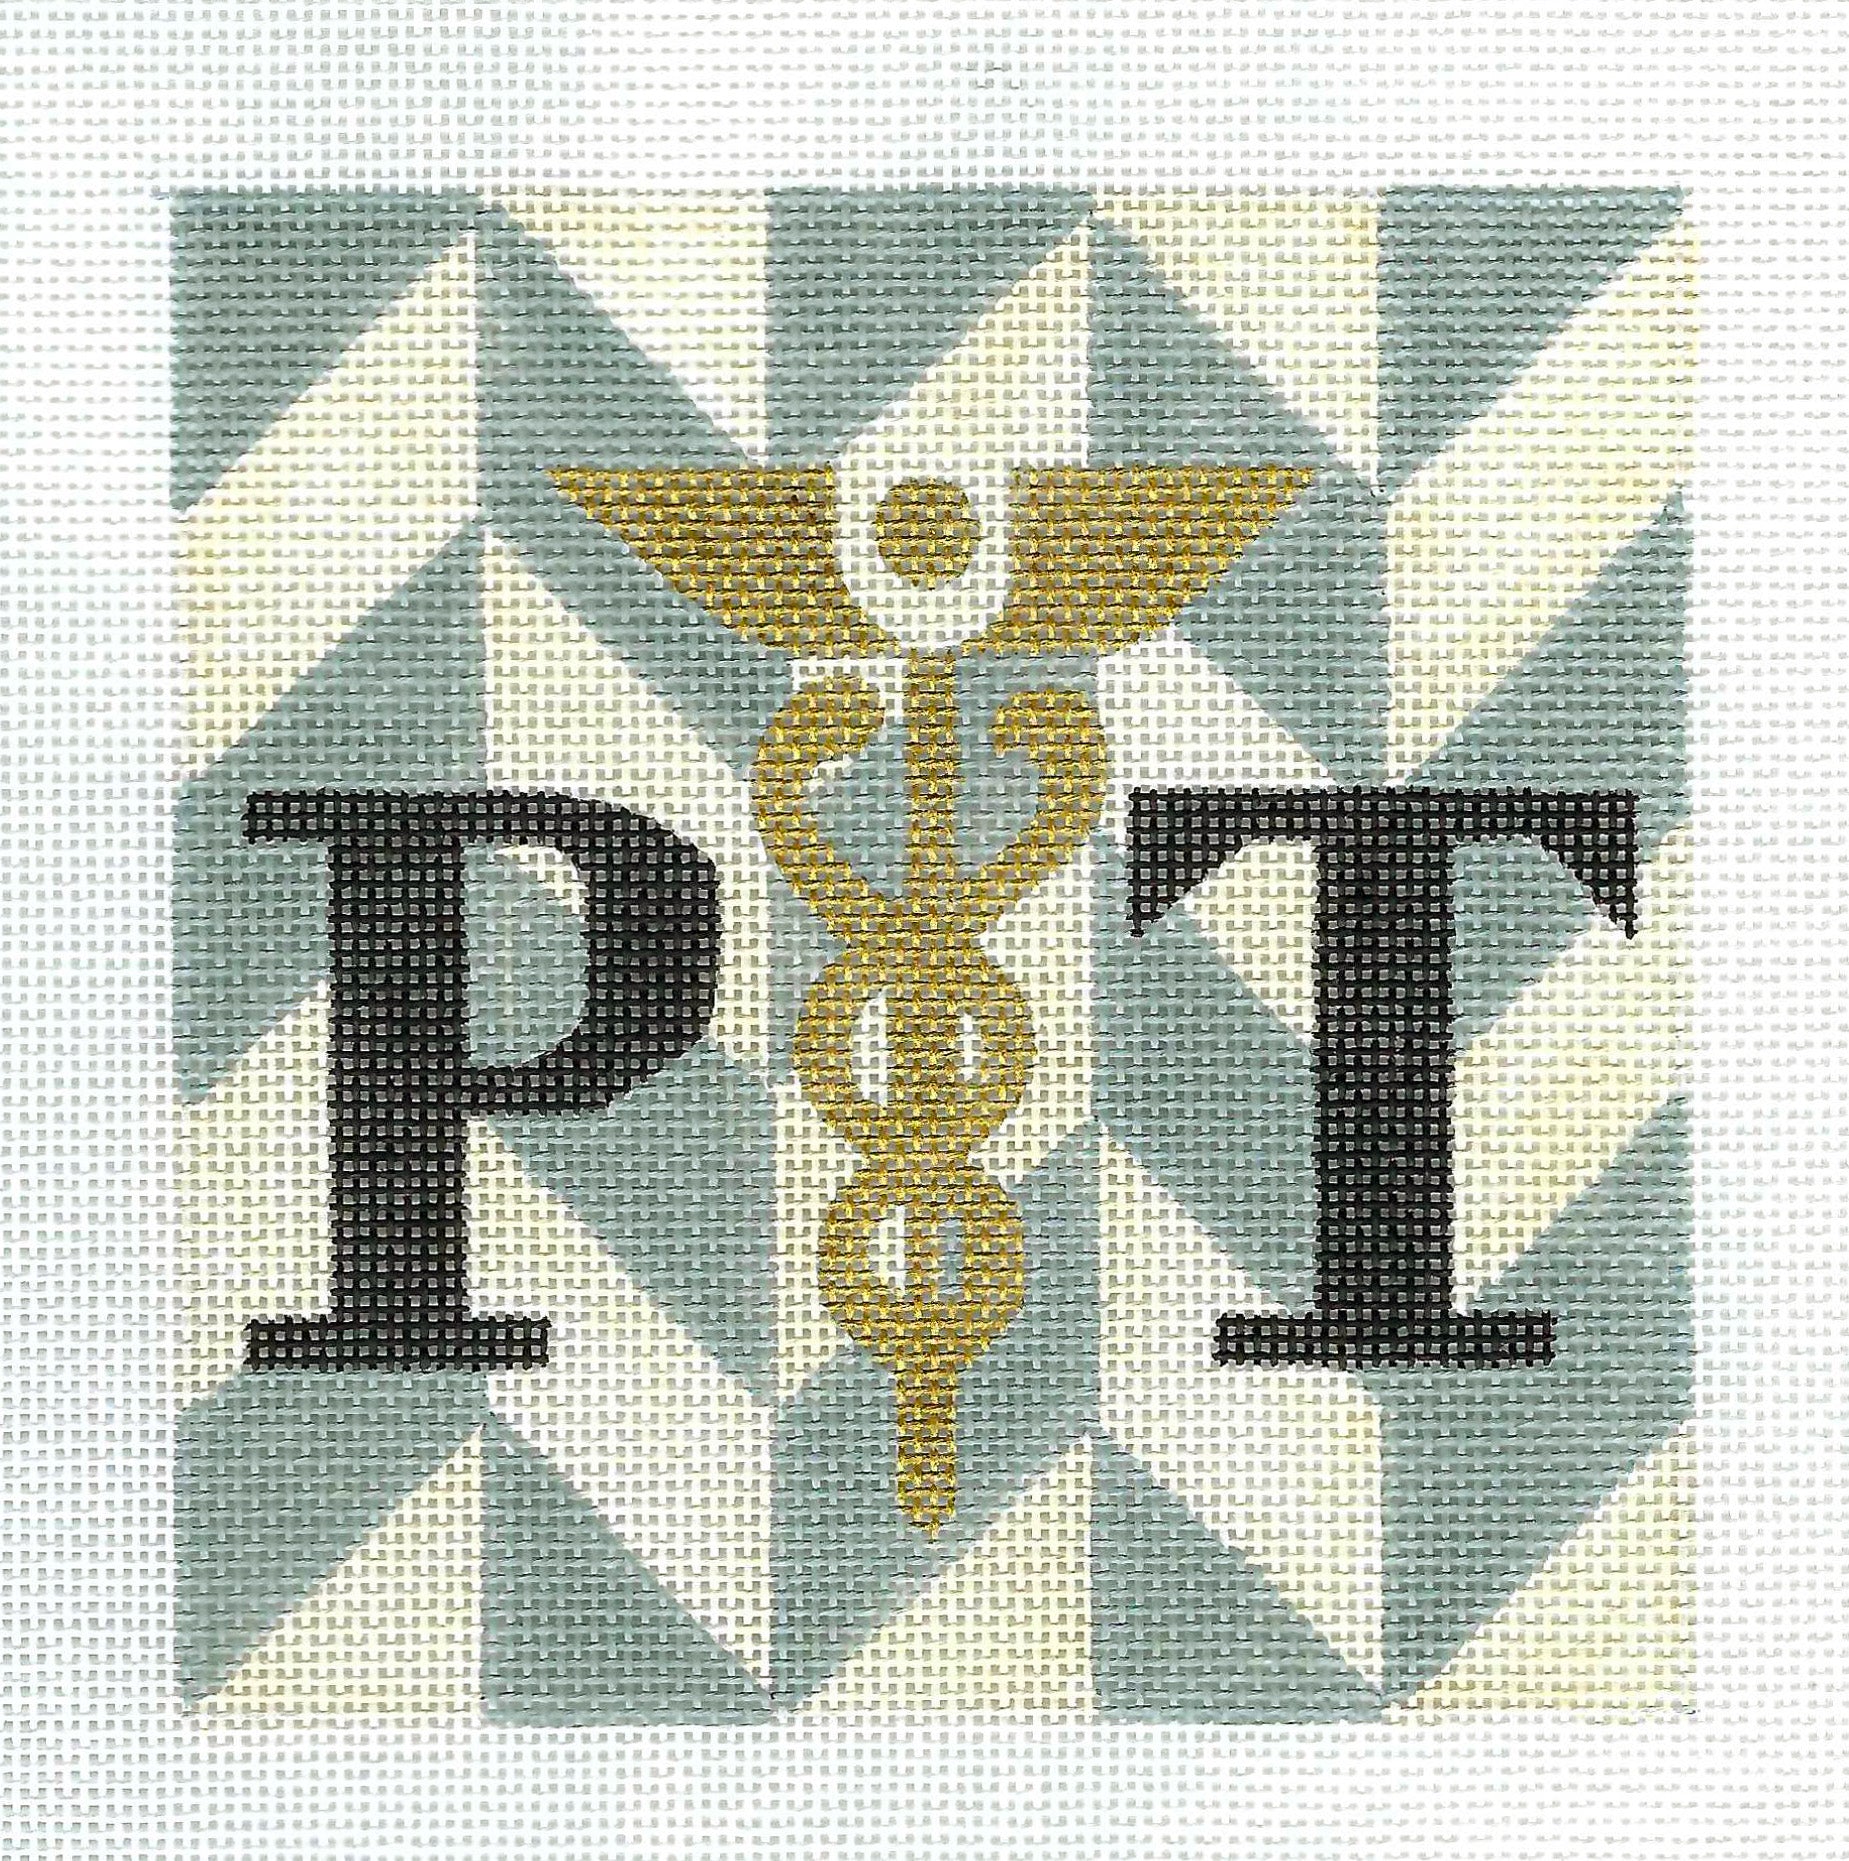 PT ~ Physical Therapist 5 Sq. handpainted Needlepoint Canvas by Melissa  Prince